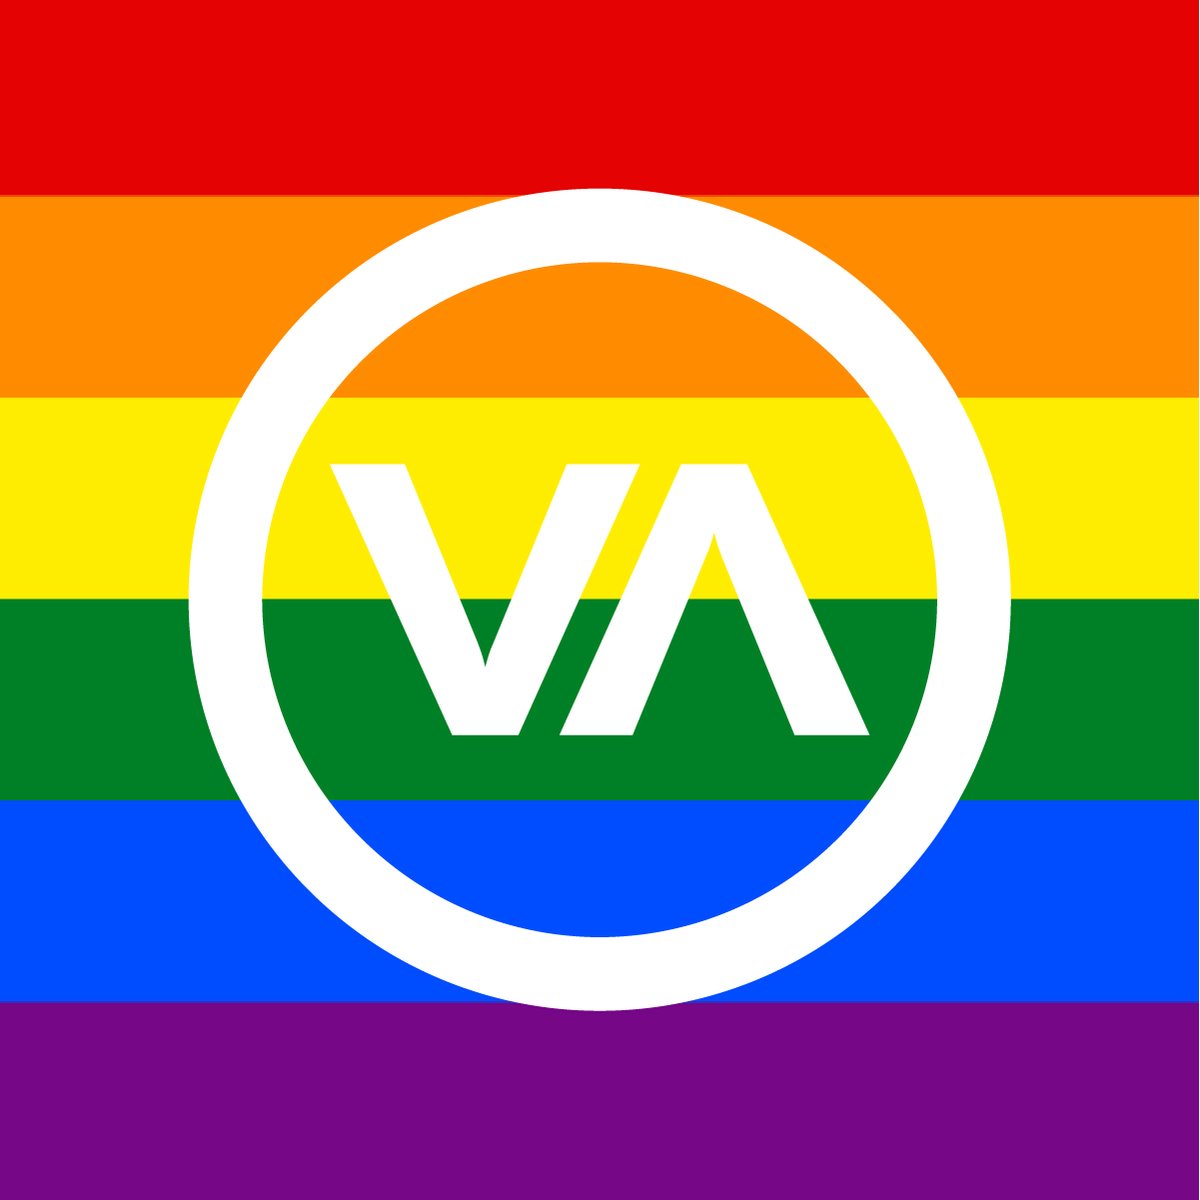 Wishing a happy Pride Month to our #LGBTQ+ colleagues, friends, and communities!

#PrideMonth #DiversityEquityInclusion  #DiversityInTheWorkplace